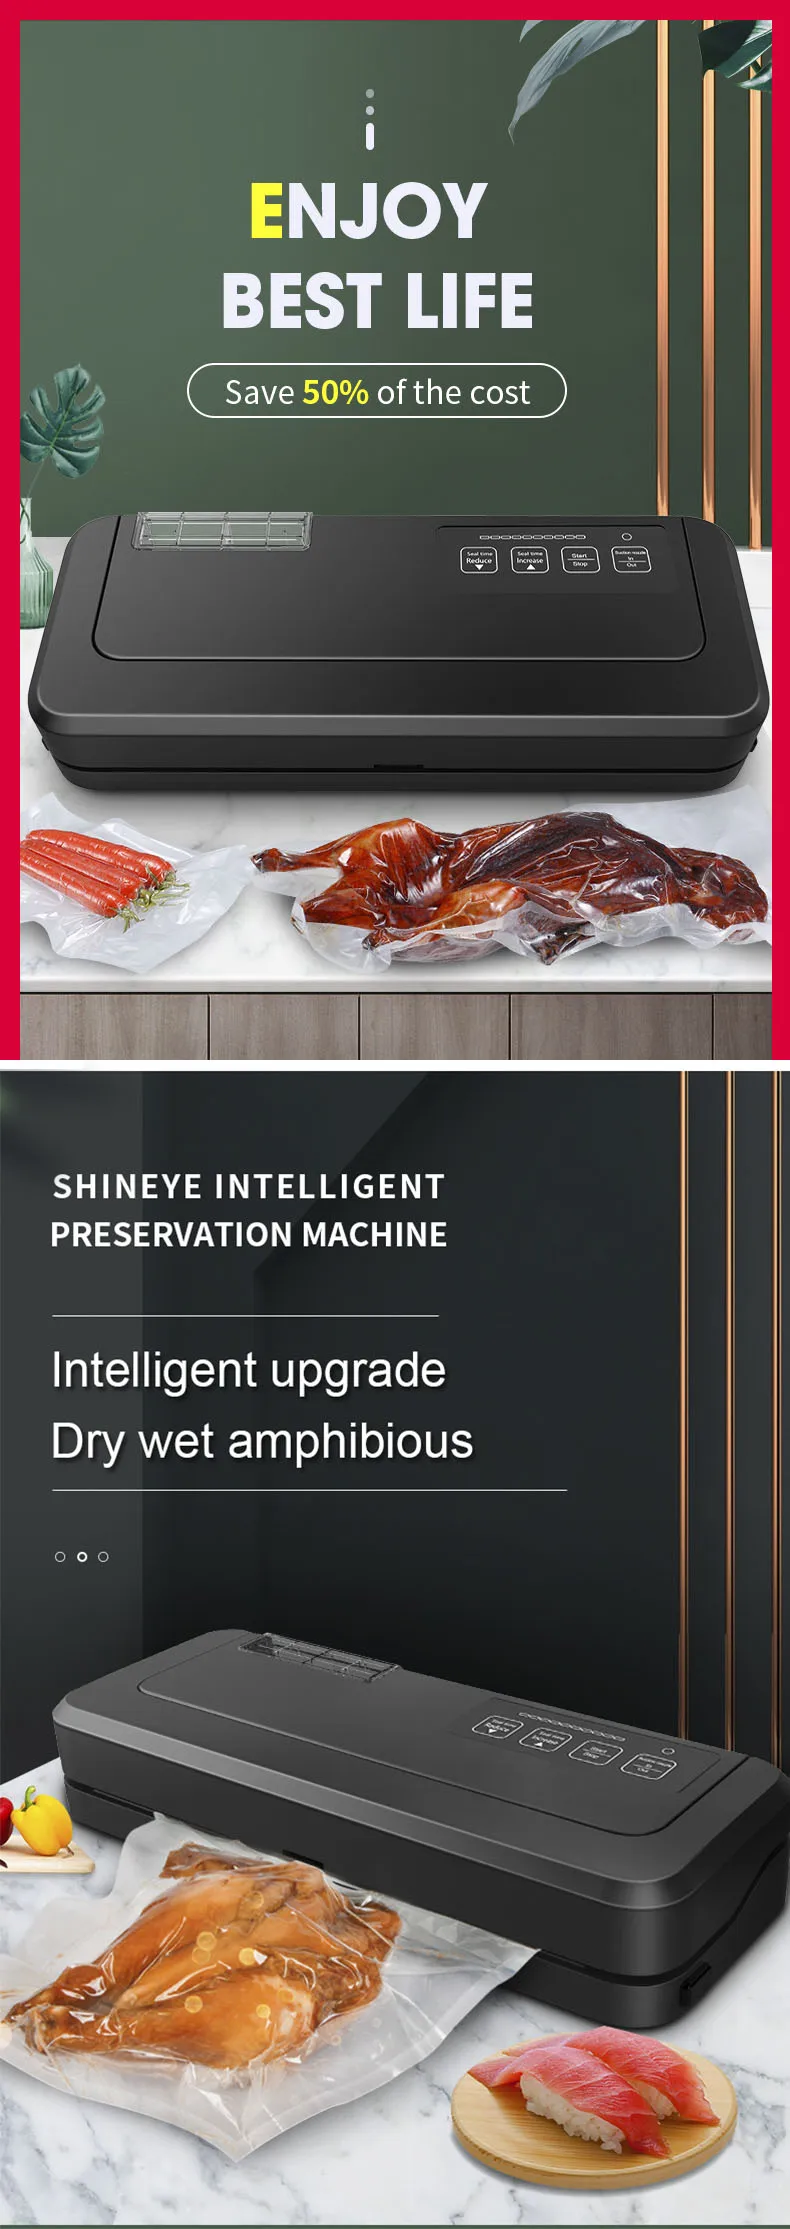 ShineYe Sous Vide P290 Automatic Wet&Dry Food Home and Commercial